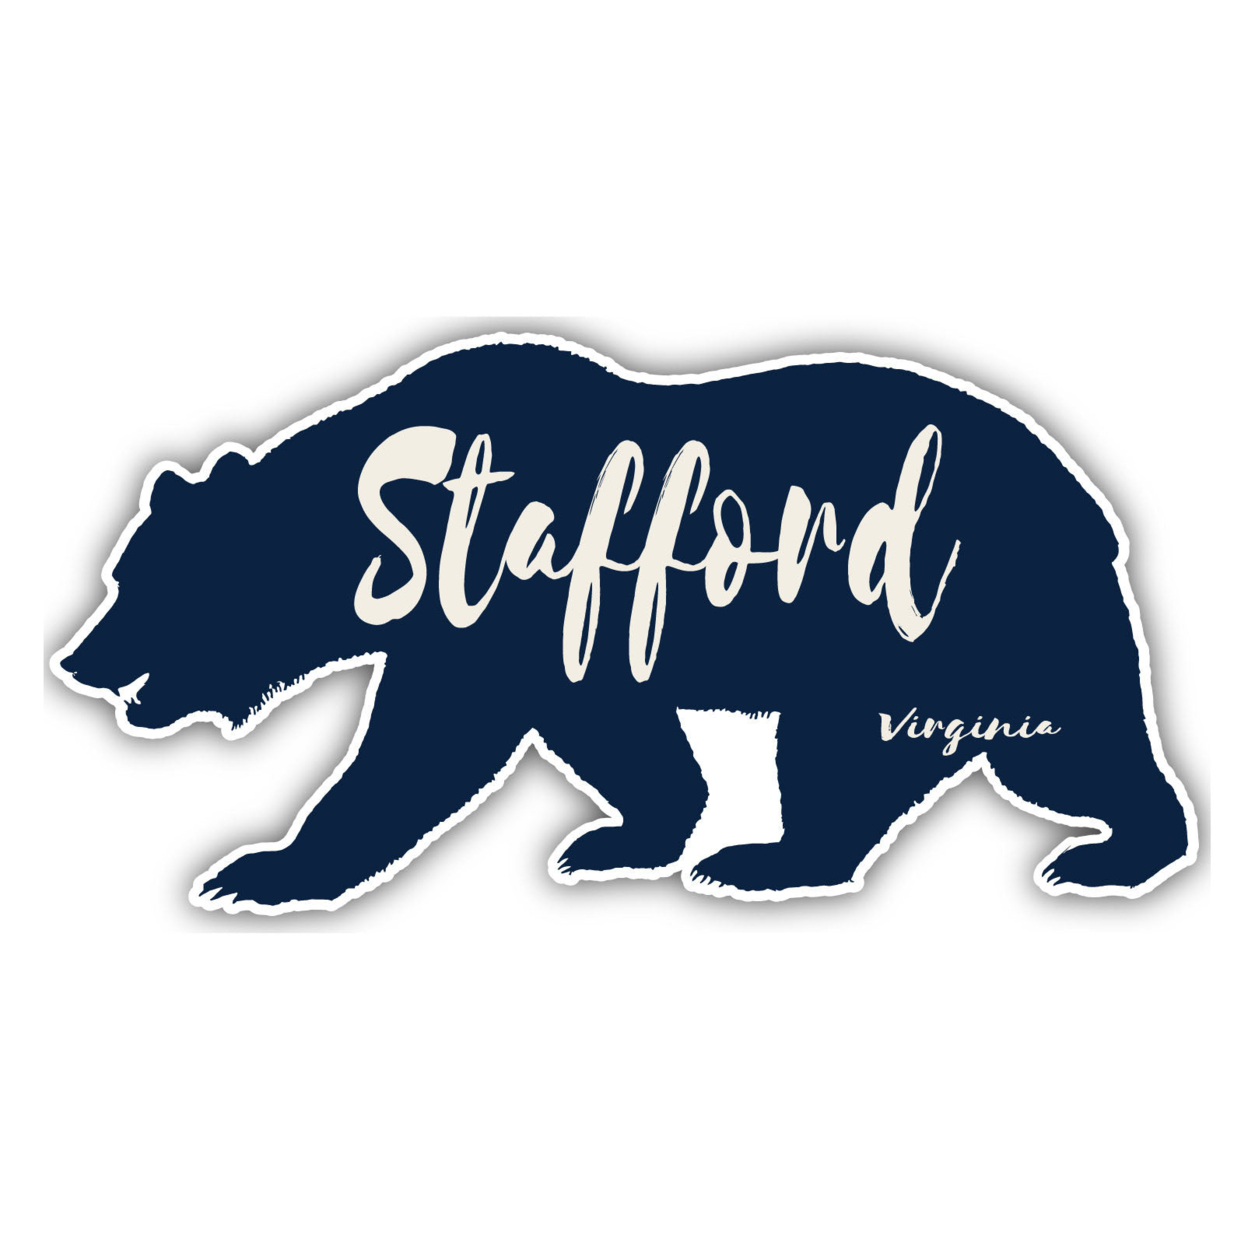 Stafford Virginia Souvenir Decorative Stickers (Choose Theme And Size) - Single Unit, 4-Inch, Great Outdoors